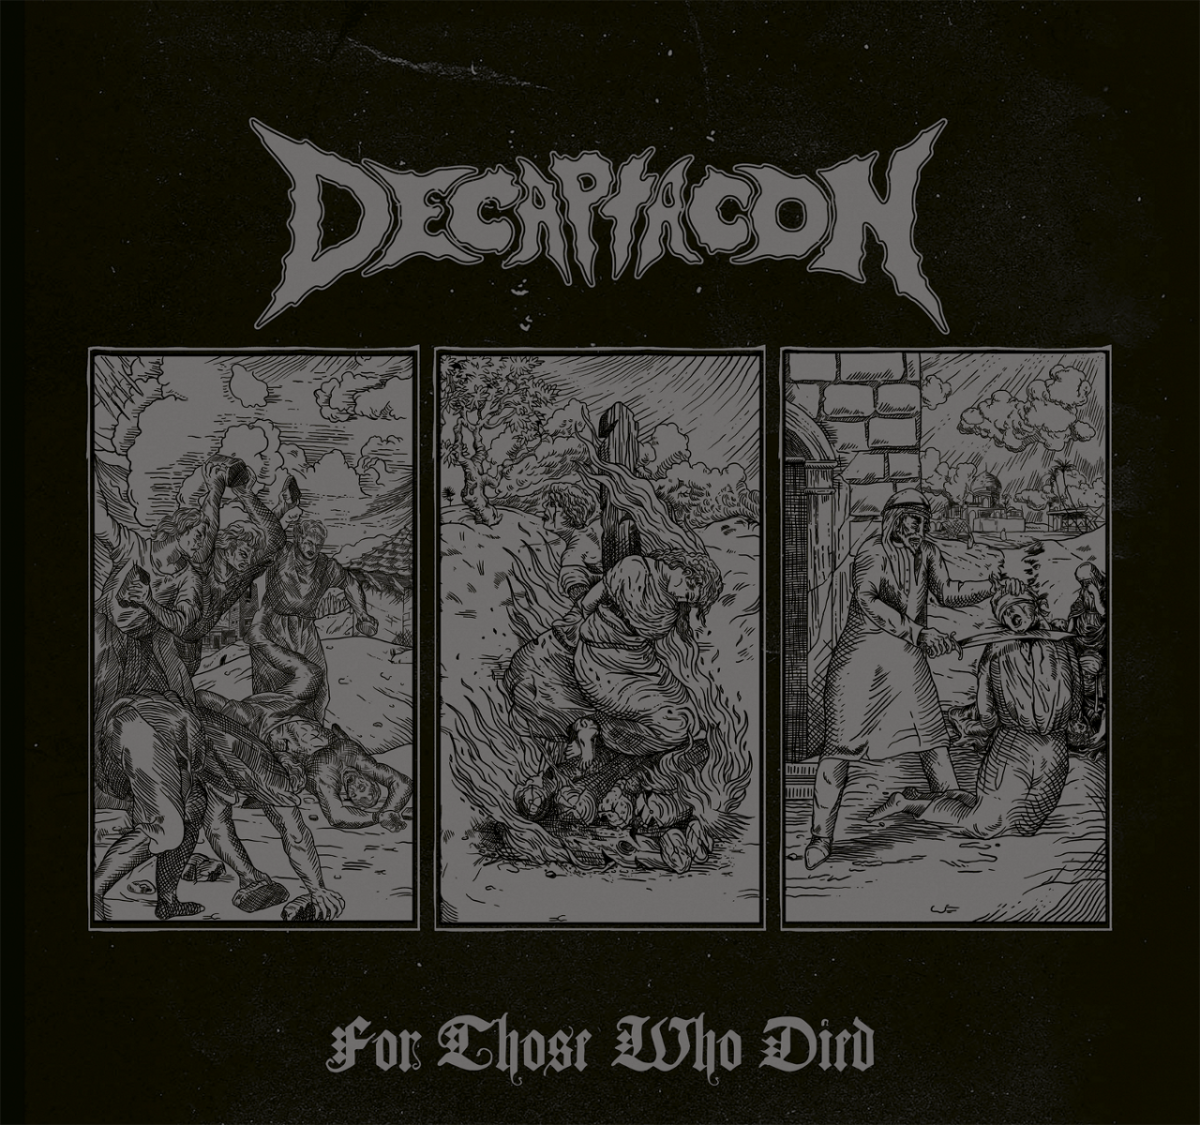 Decaptacon-For-Those-Who-Died-album-cover